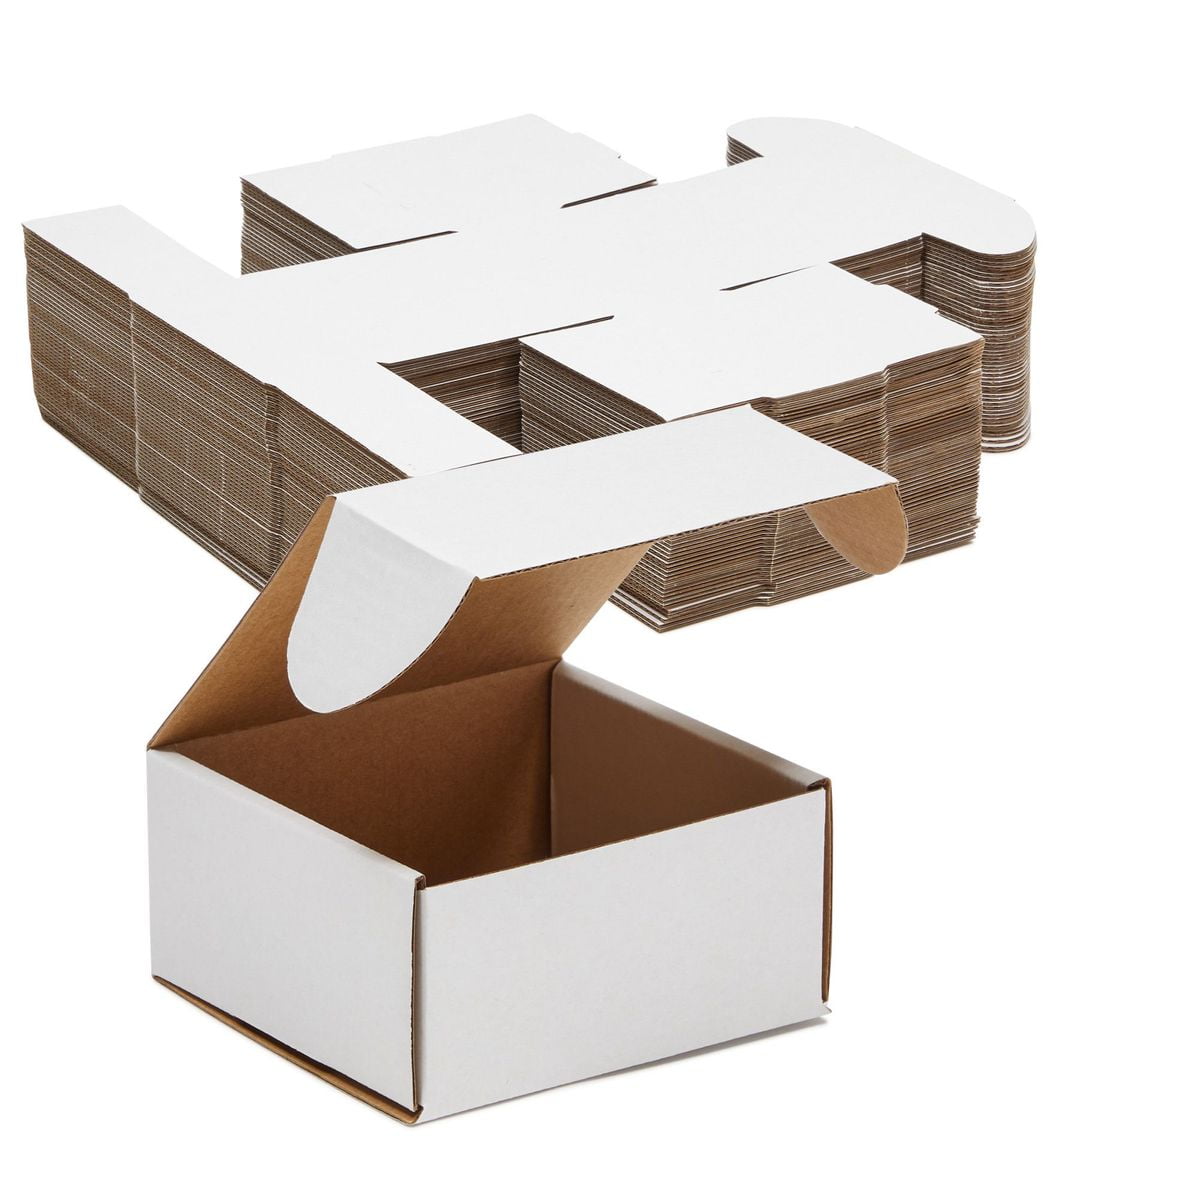 50-12 x 8 x 4 Corrugated Shipping Boxes Packing Storage Cartons Cardboard Box 